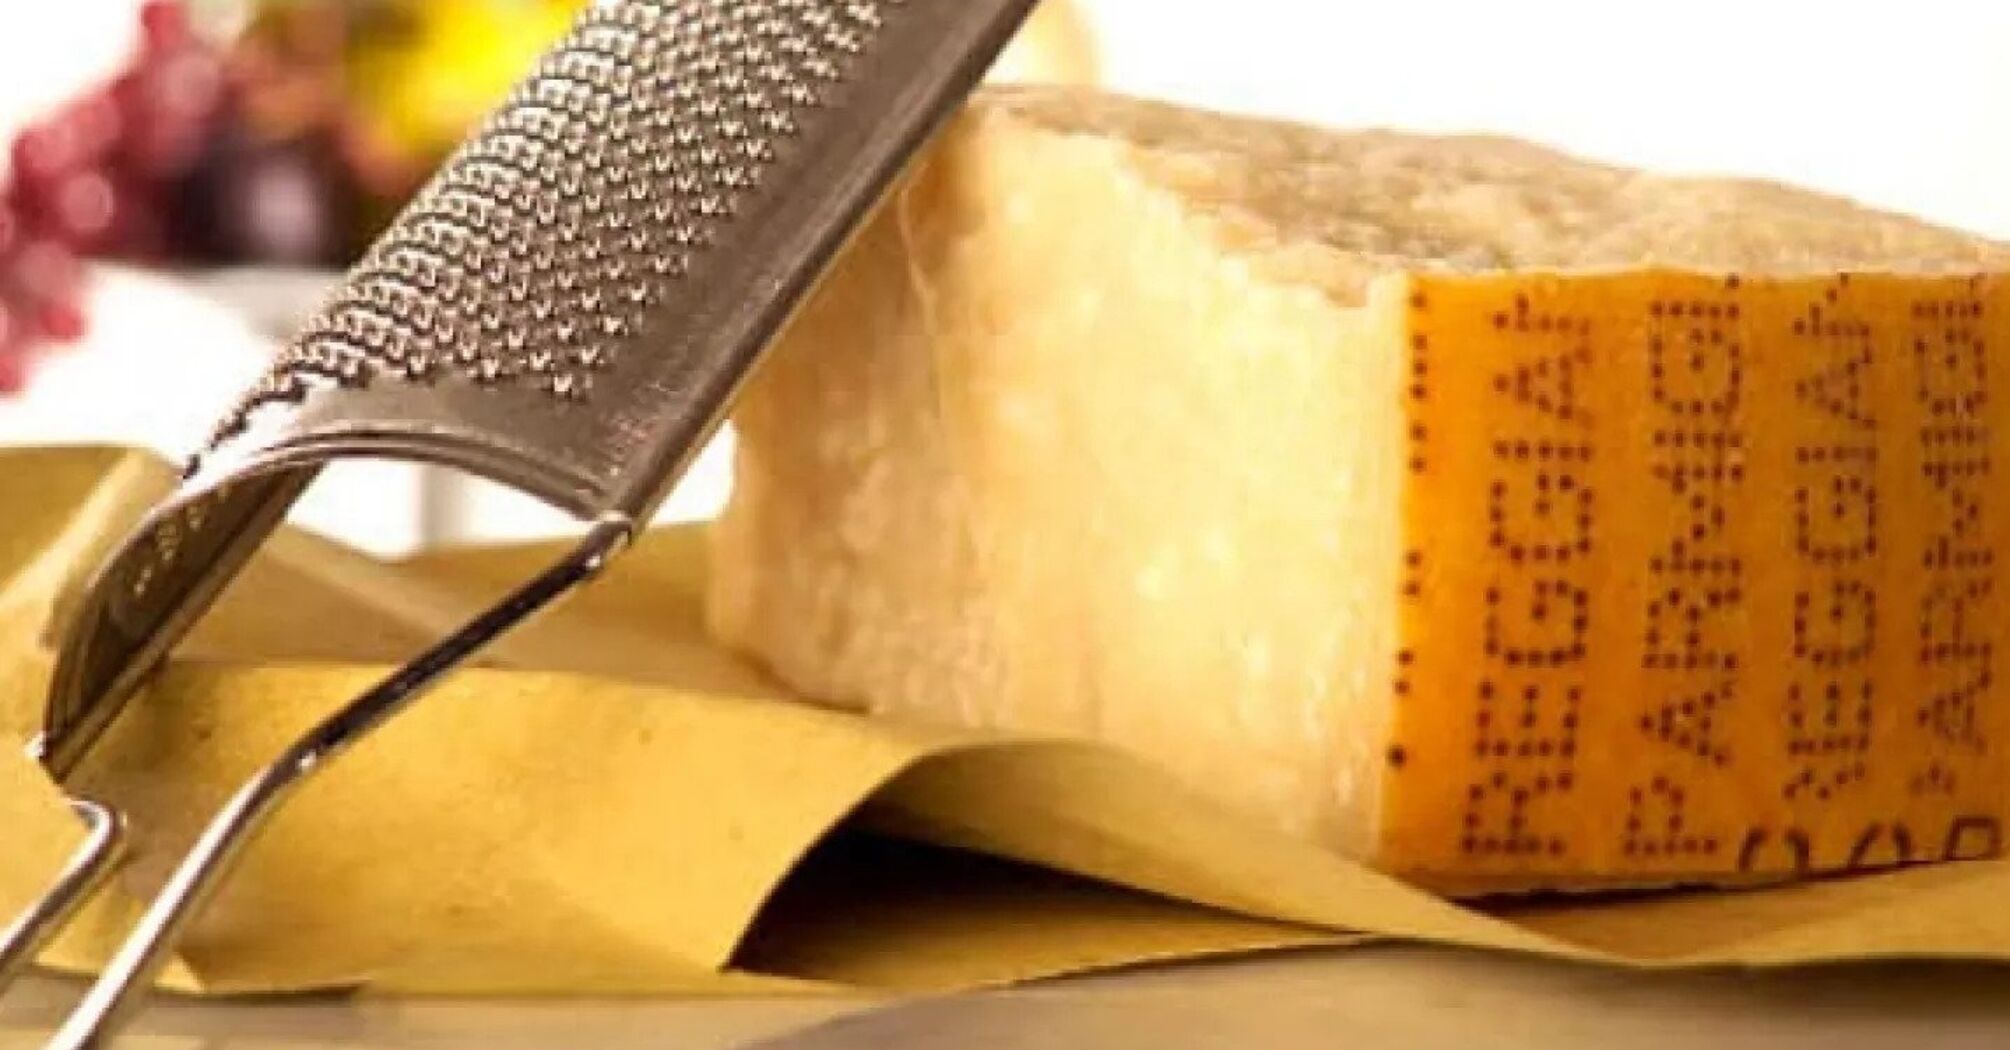 How to store Parmesan cheese